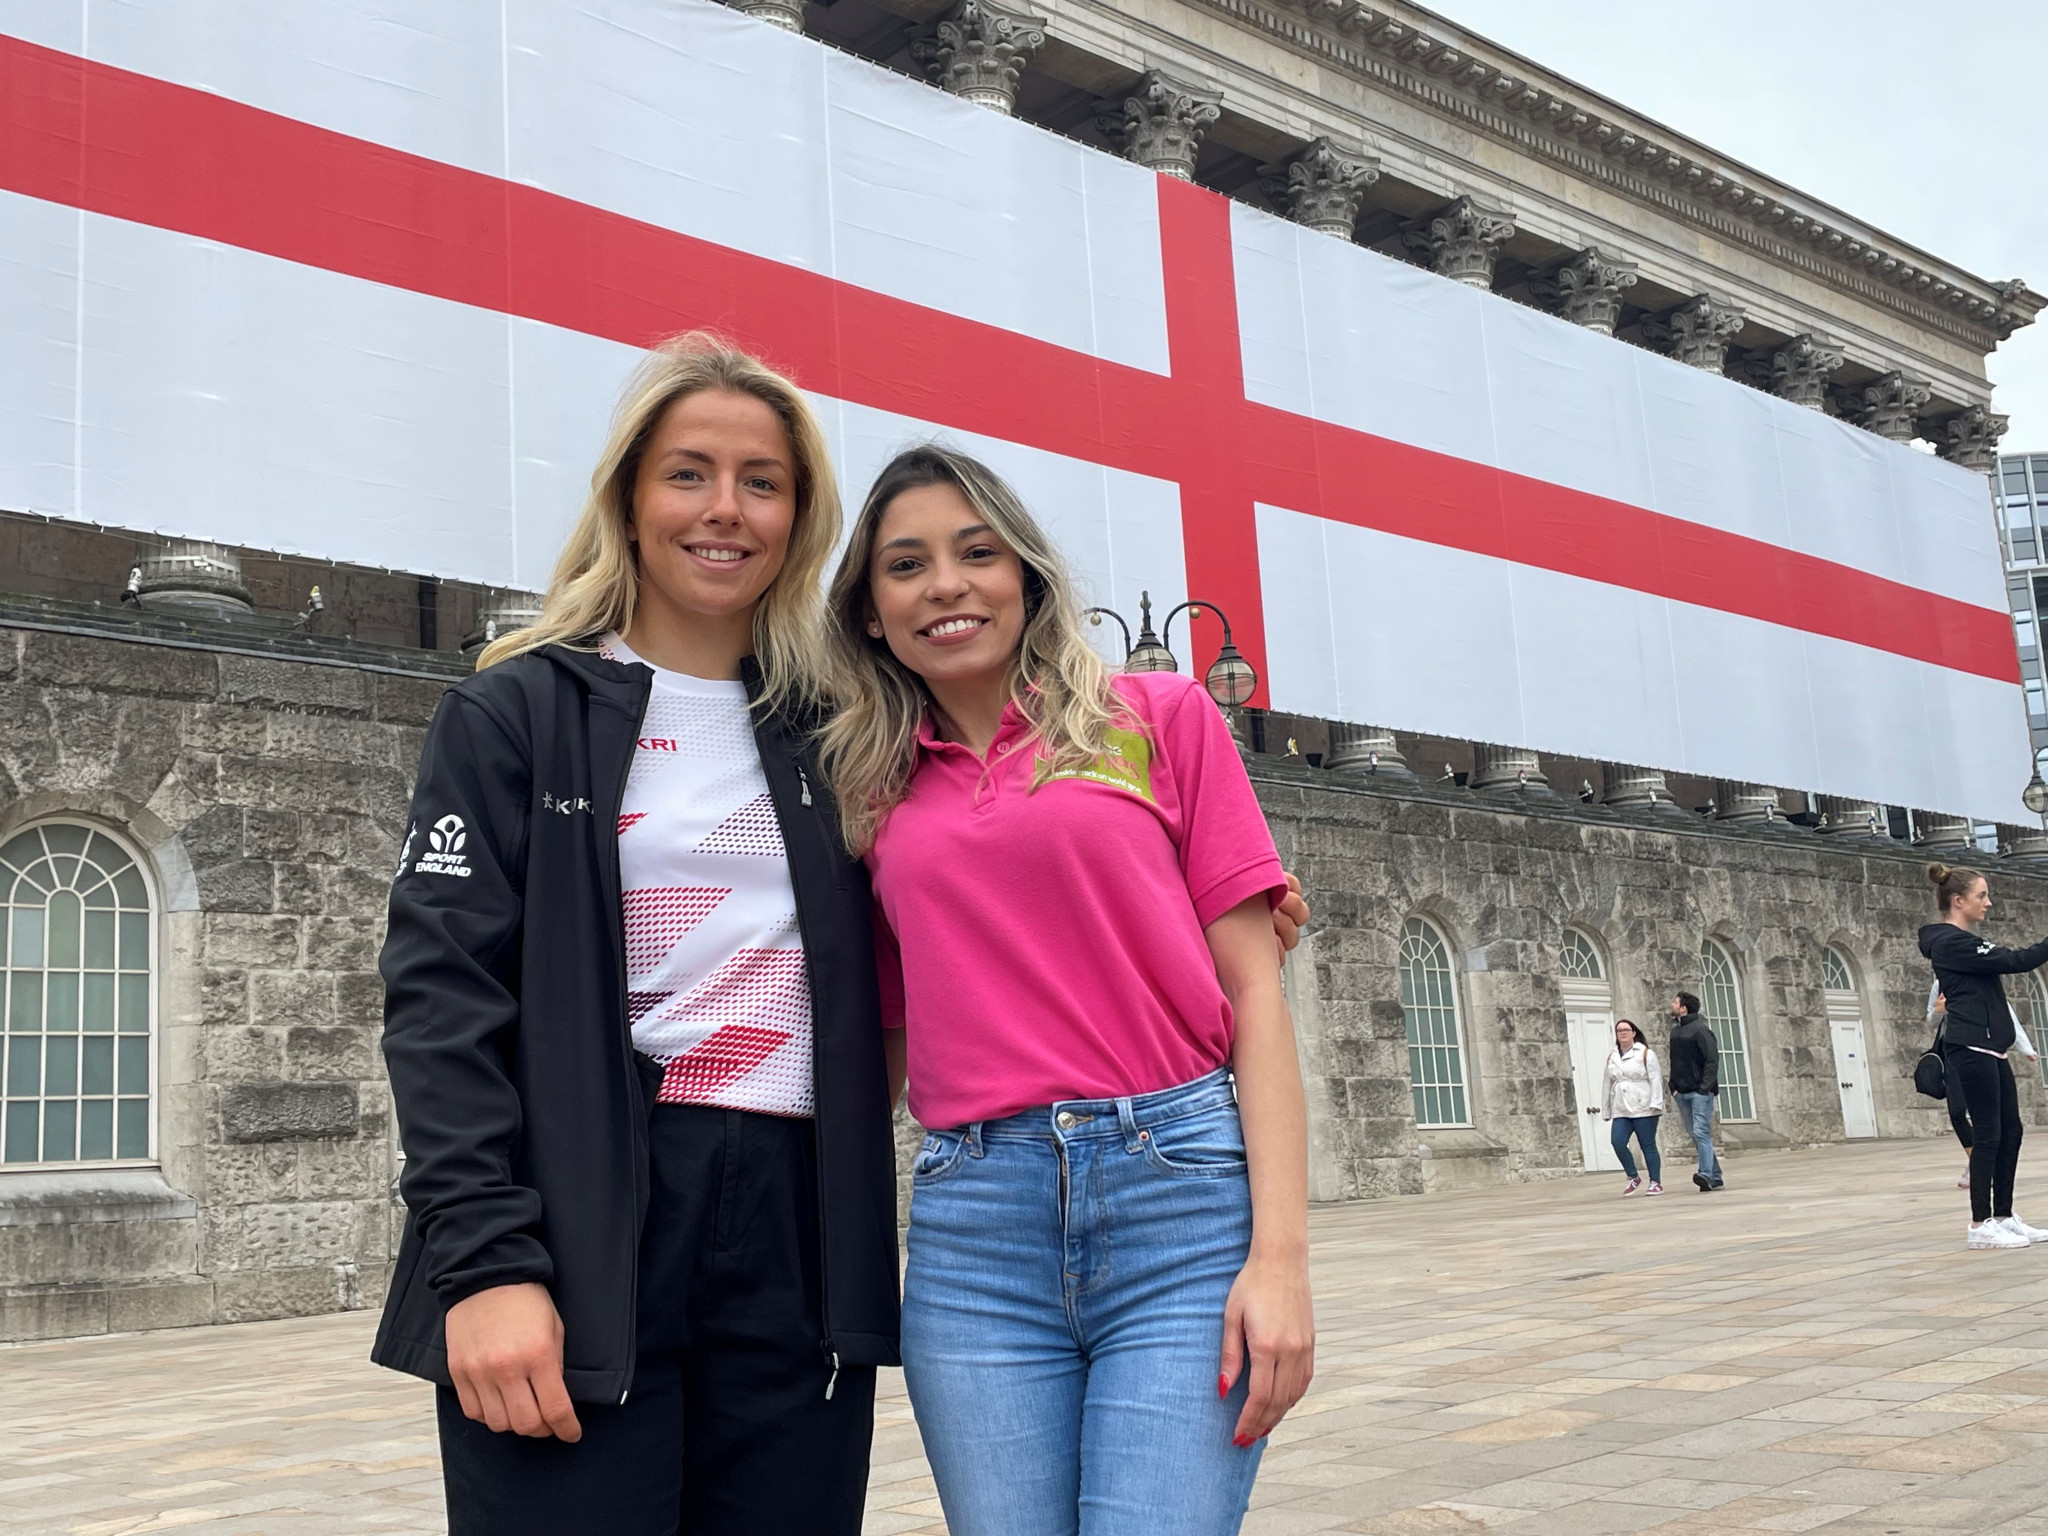 Editorial intern Leticia Bila met with judoka Kelly Petersen-Pollard during today's unveiling of a giant England flag ©ITG